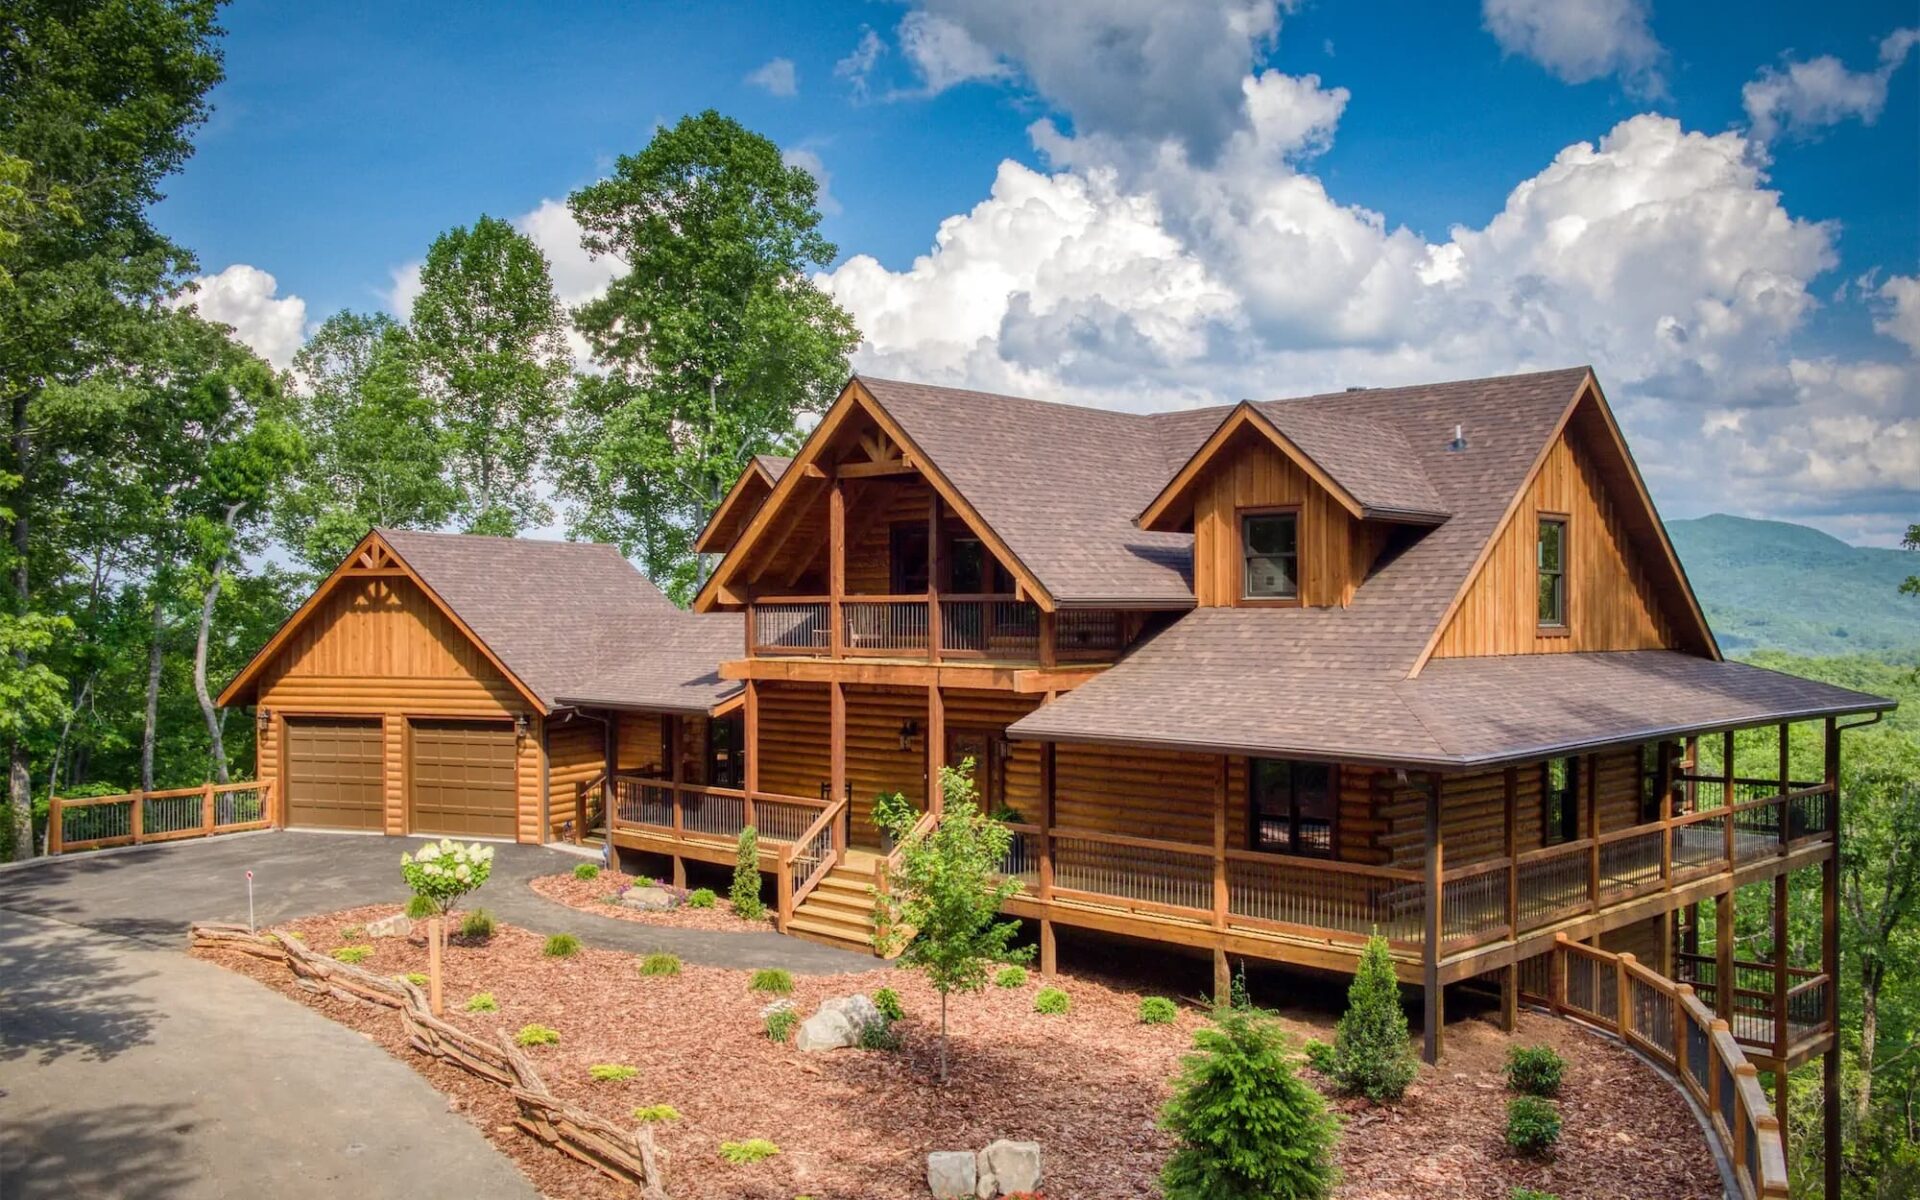 The image showcases a spacious, beautifully crafted log home nestled within a serene woodland setting.